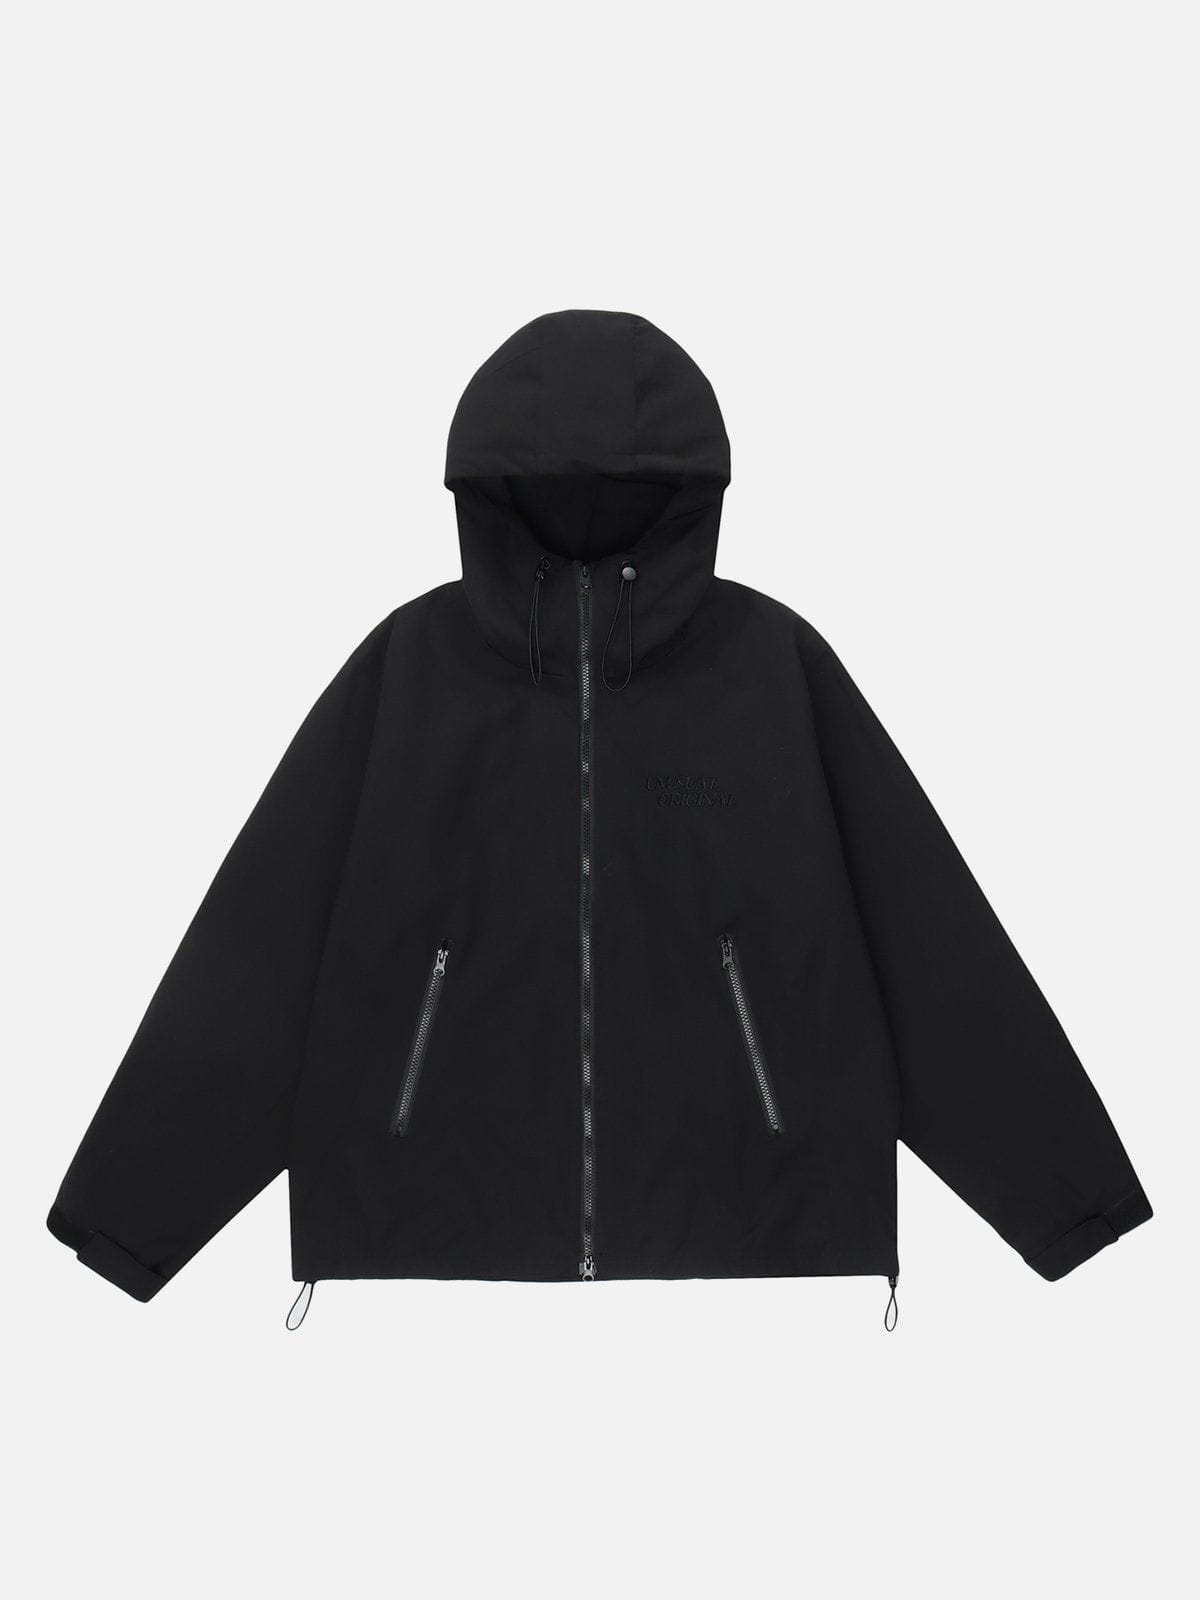 Majesda® - Solid Color Thickend Anorak outfit ideas, streetwear fashion - majesda.com